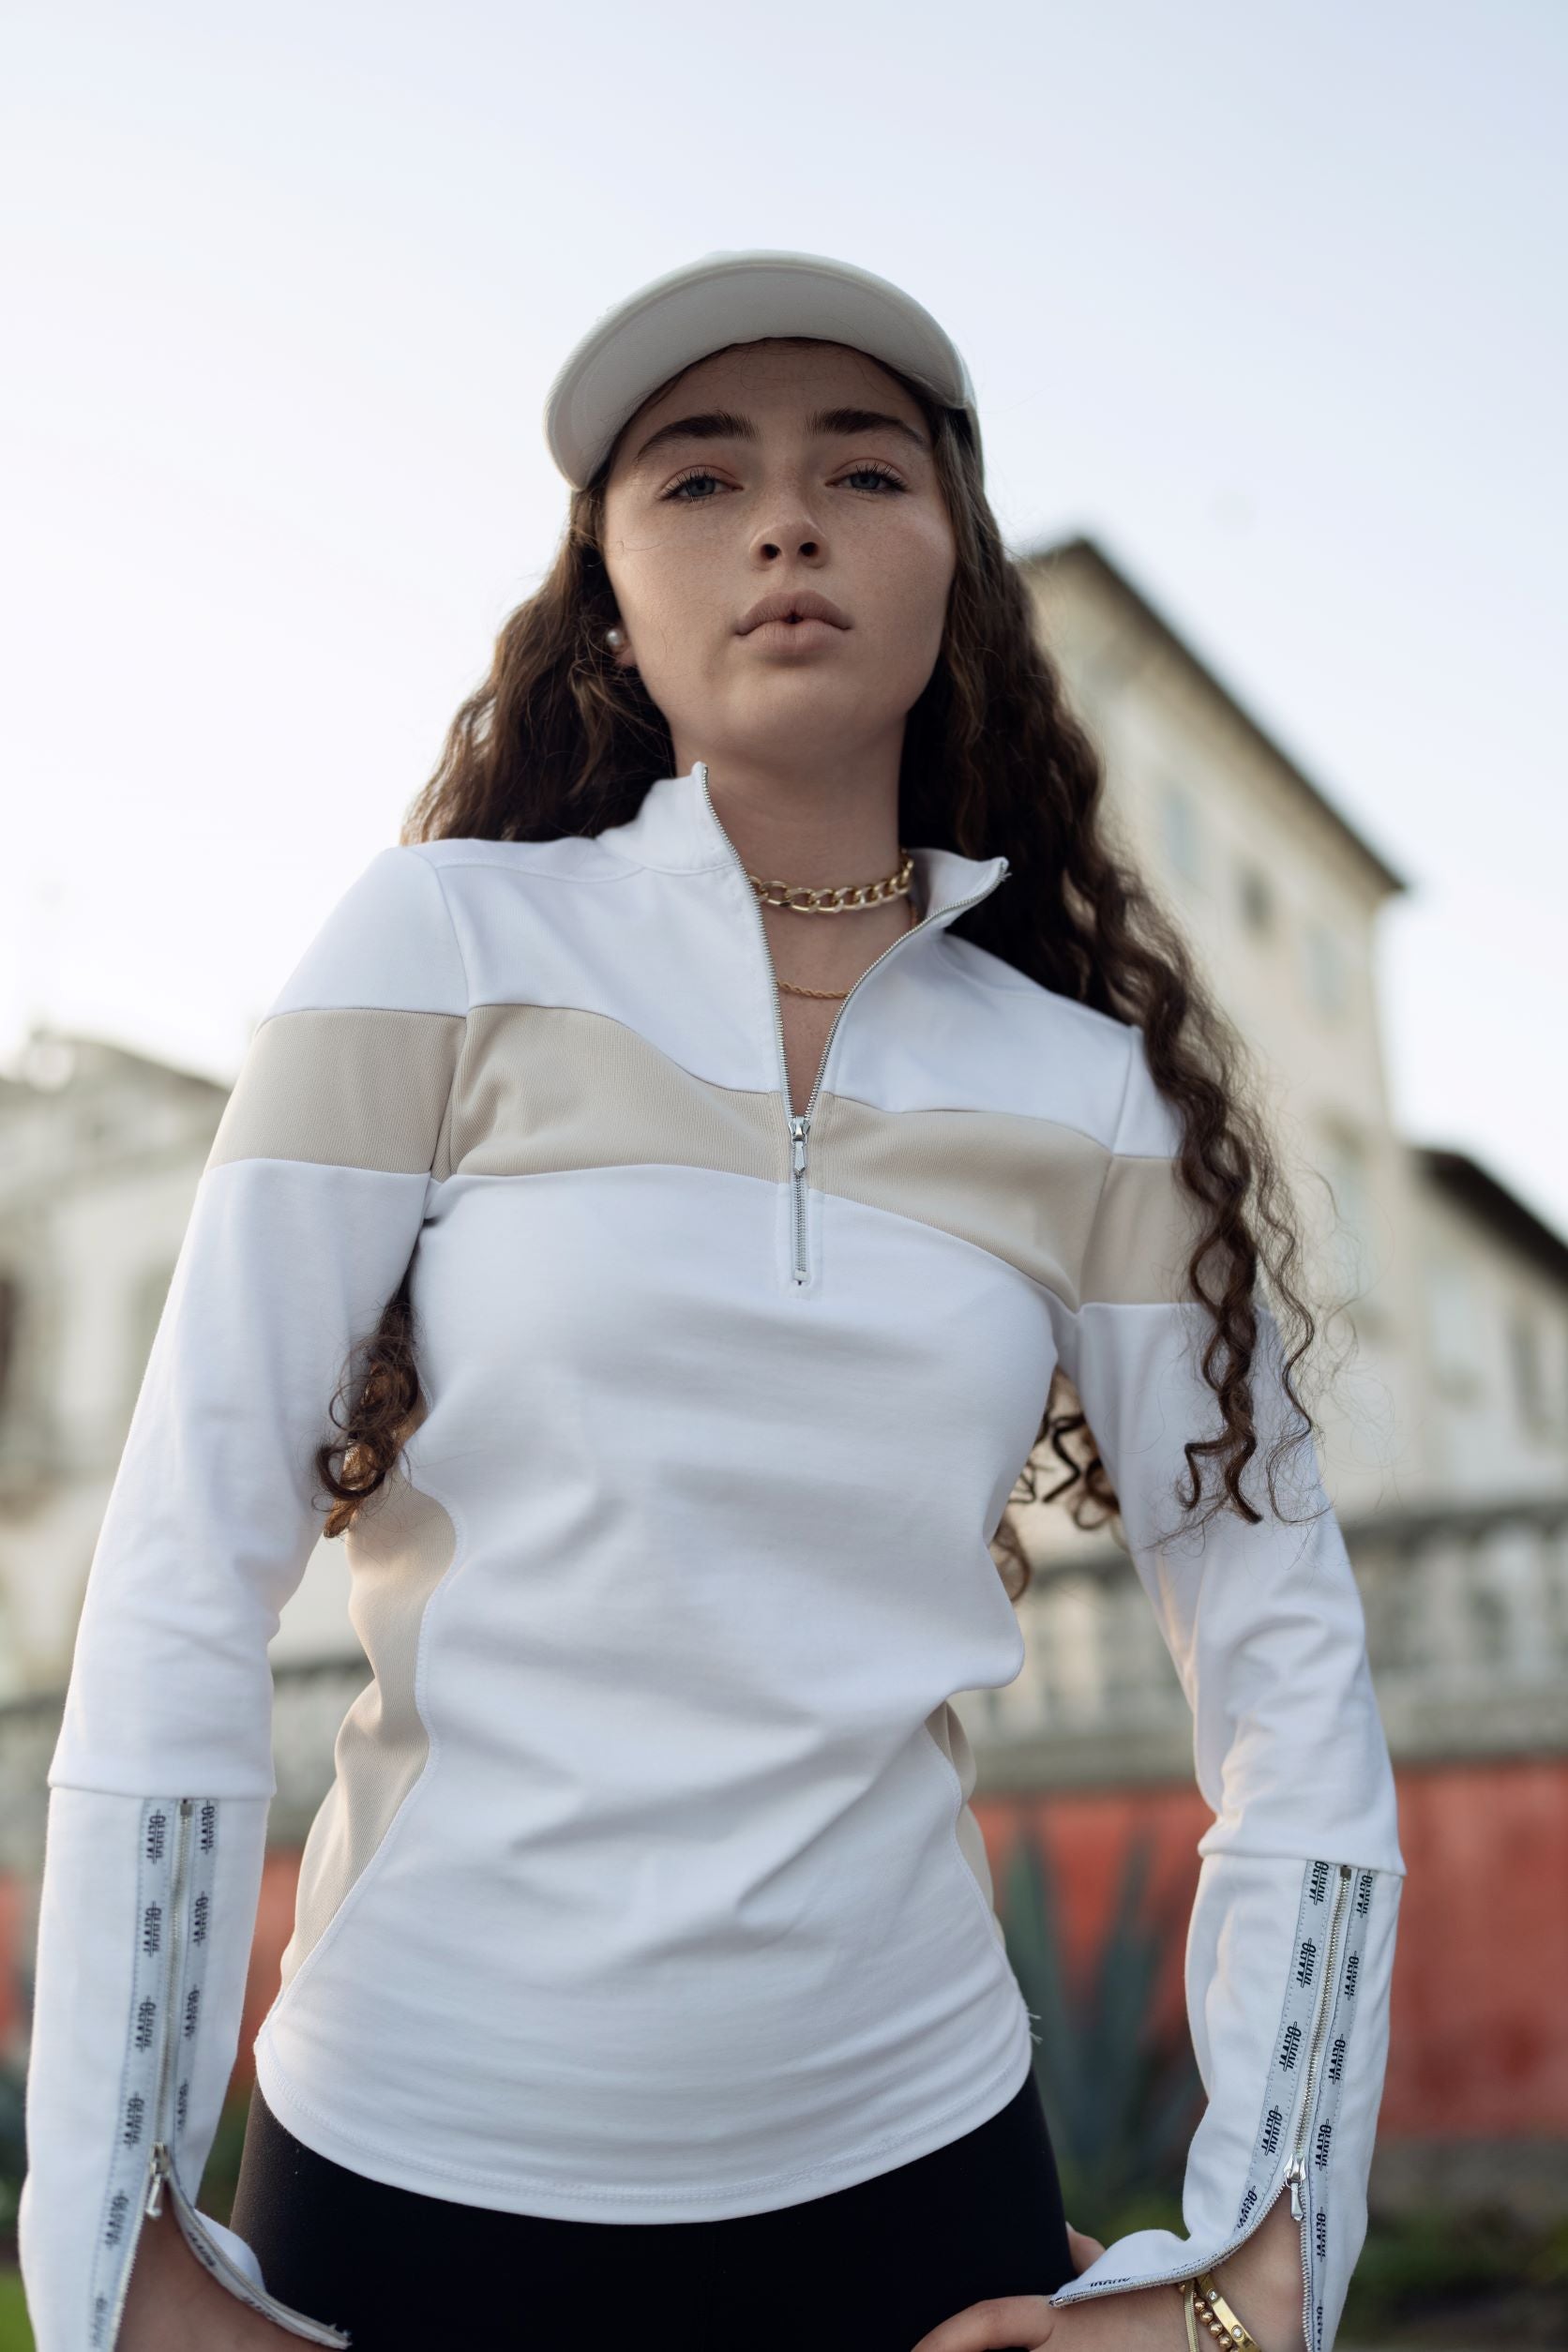 Fitted Serena Long Zipper Top - White and Cream - Olivvi World